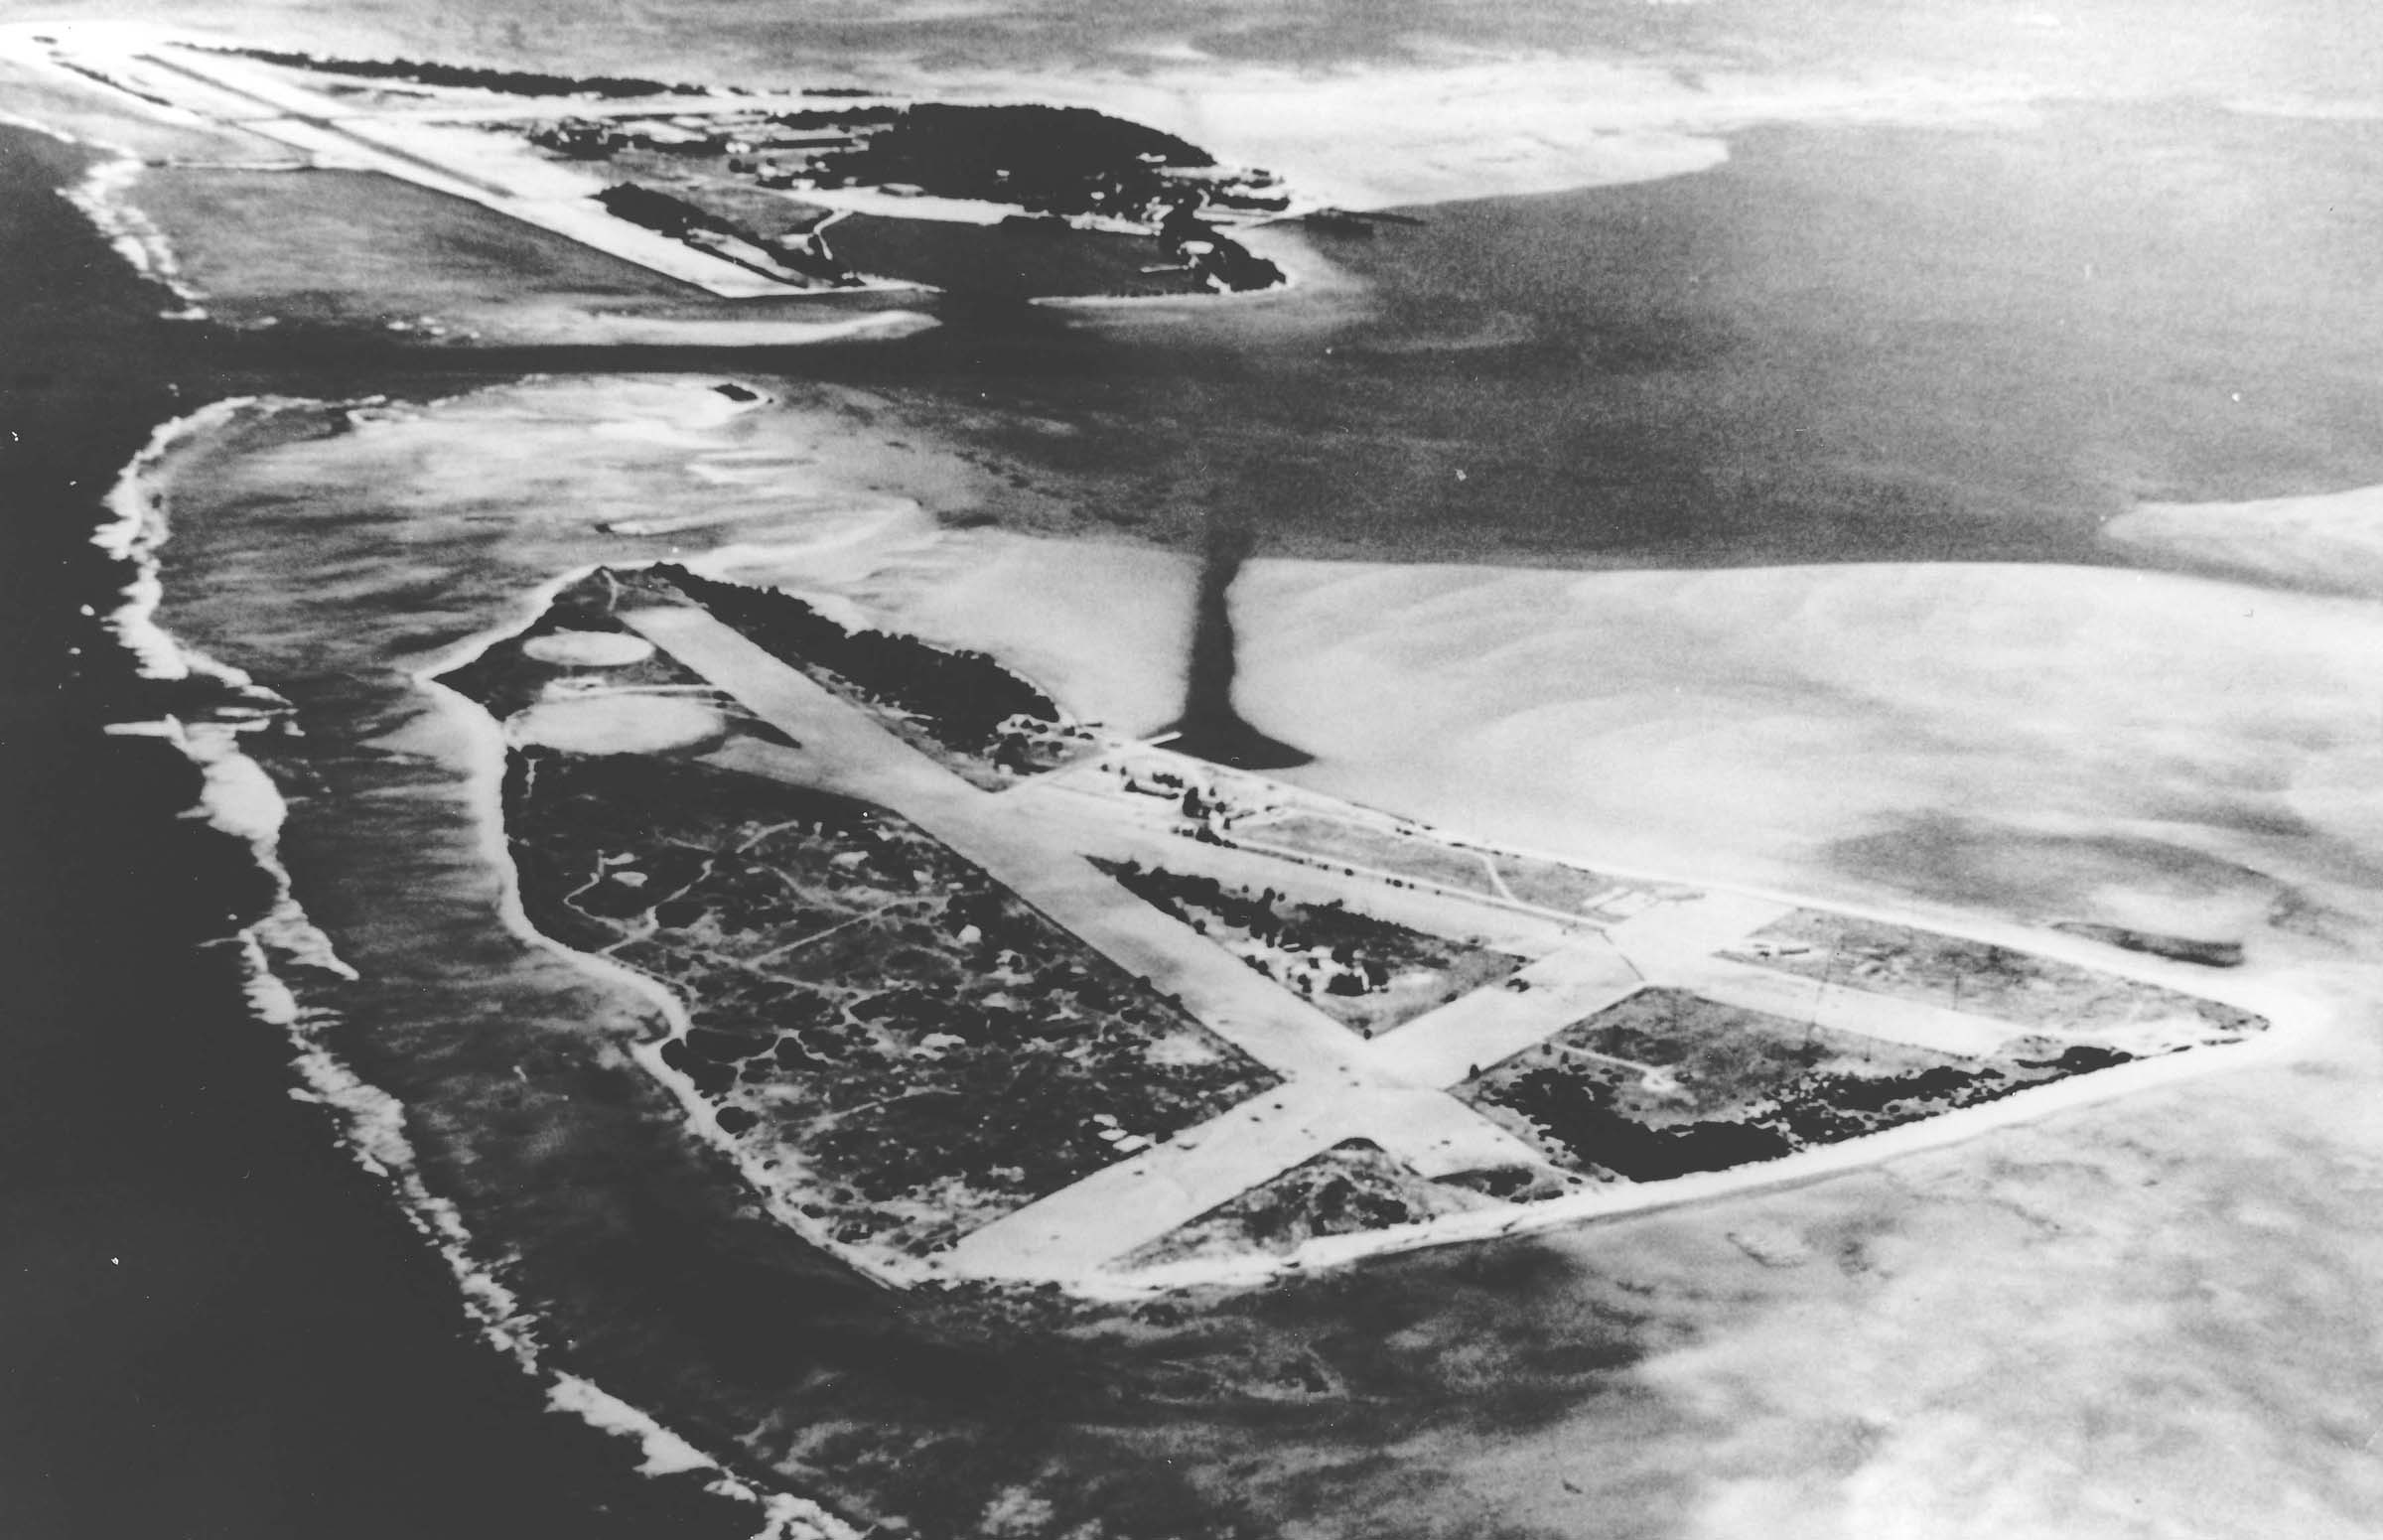 Aerial view of the Midway Islands and the Naval Air Station, Jun 1942 (later renamed Henderson Field). Interestingly, the air station is two different runway complexes on two different islands, but it still considered one air station.